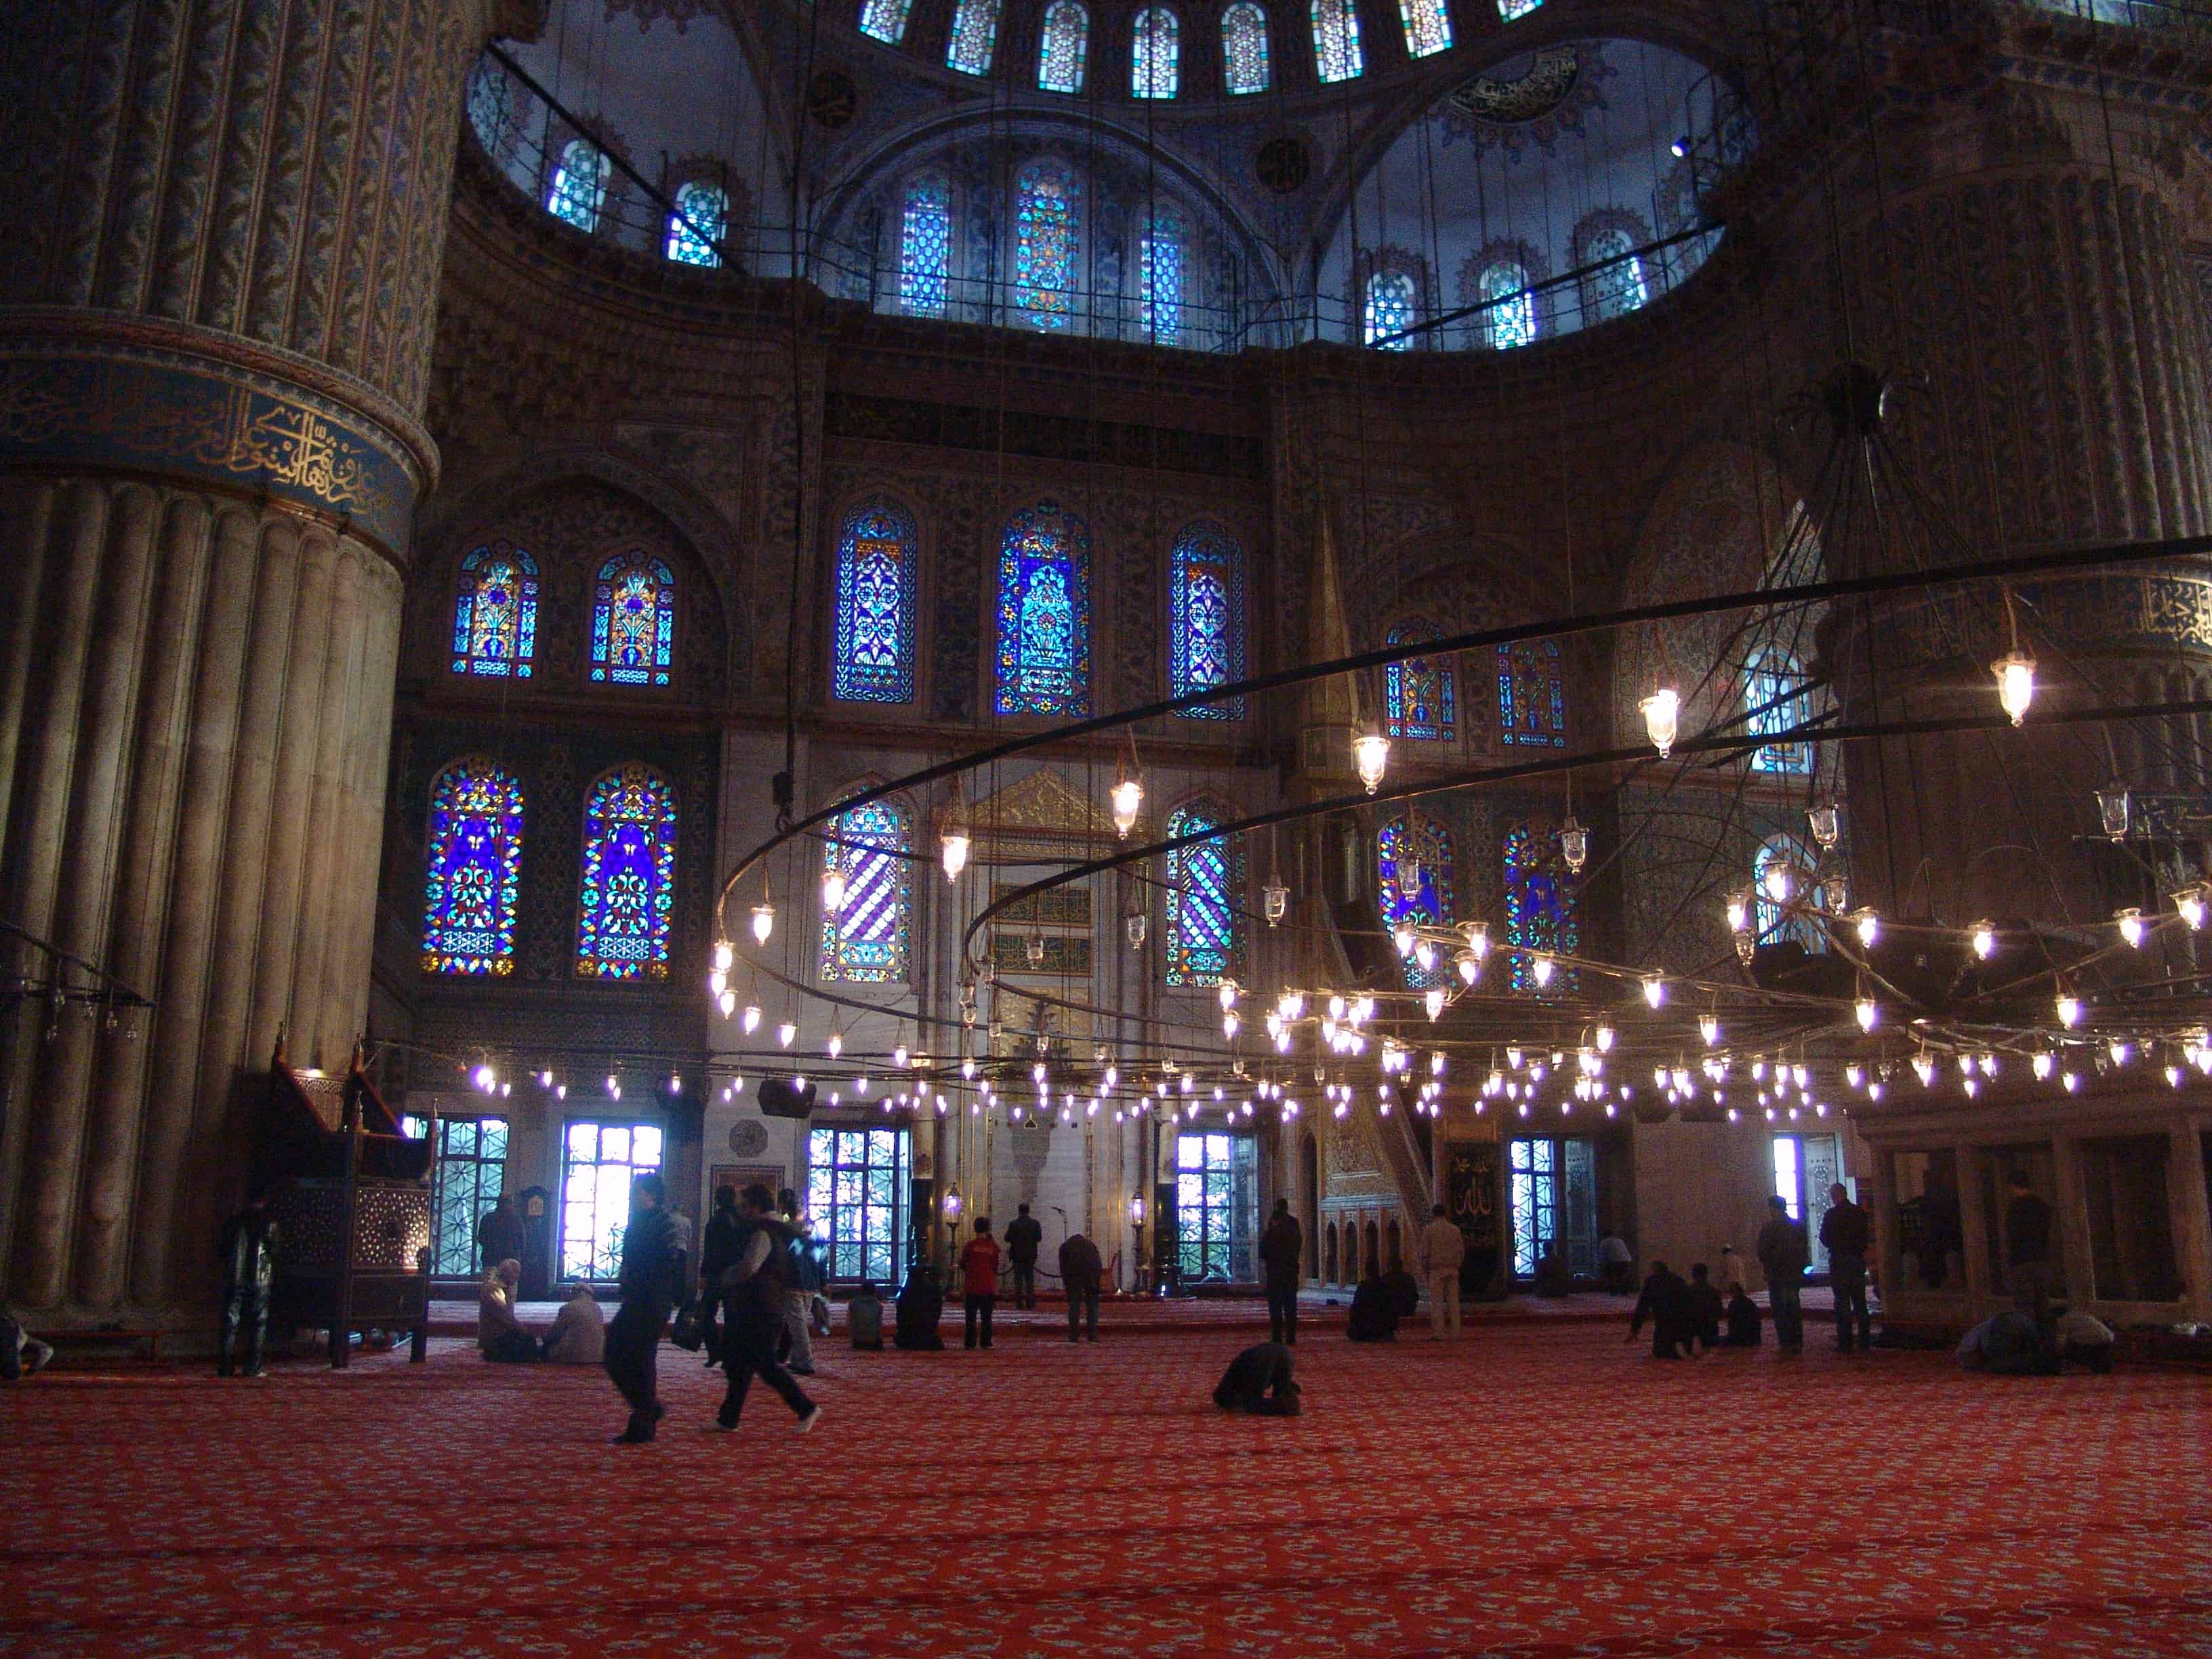 Prayer hall of the Sultan Ahmet Camii (Blue Mosque) in Fatih, Istanbul, Turkey